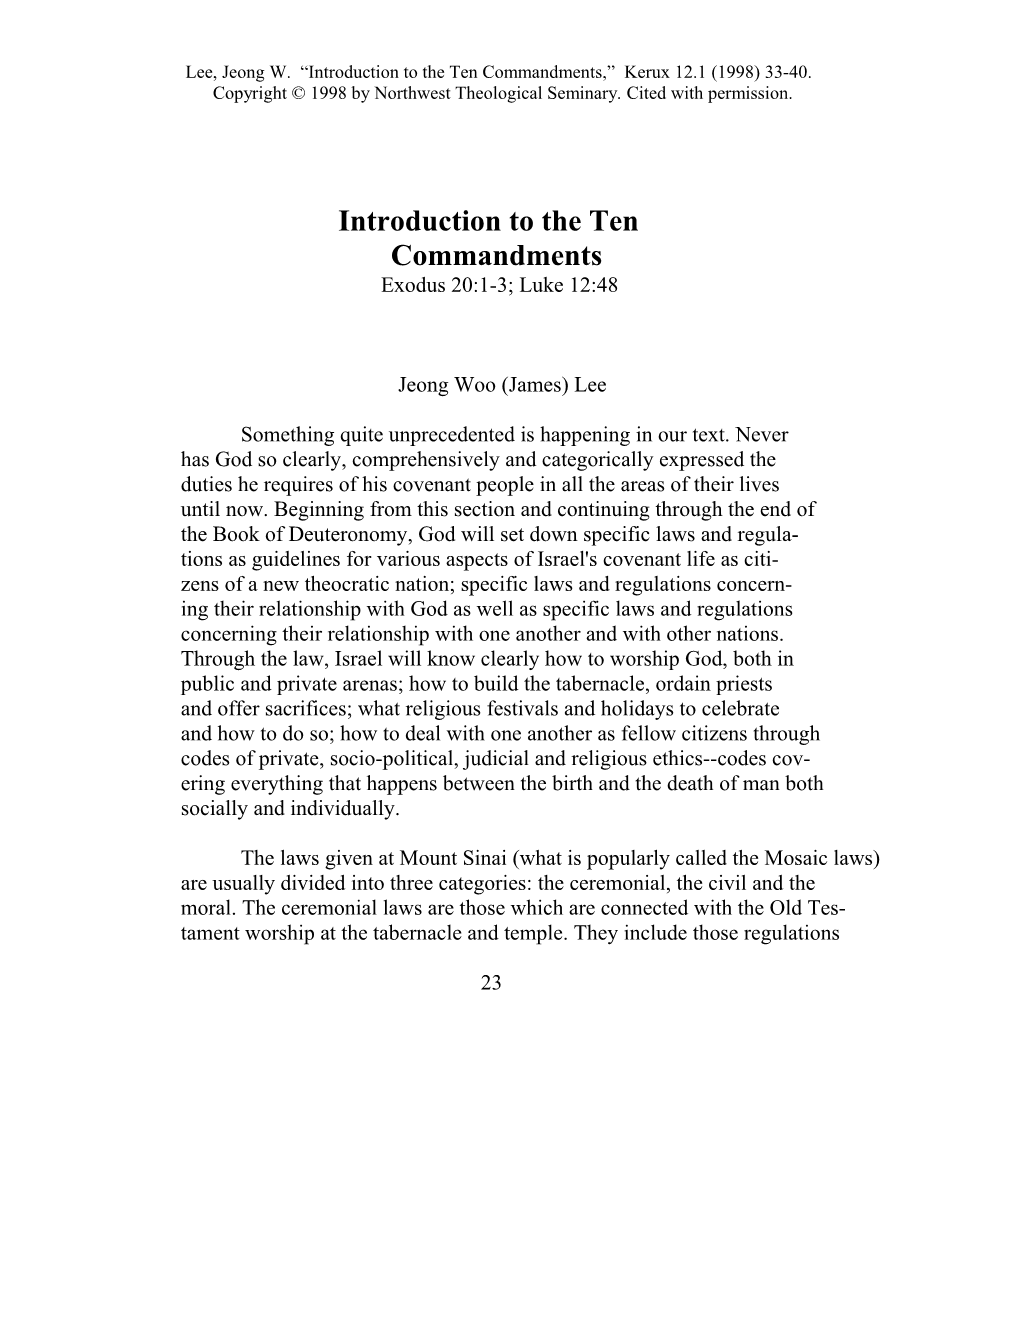 Lee, Jeong W. Introduction to the Ten Commandments, Kerux 12.1 (1998) 33-40